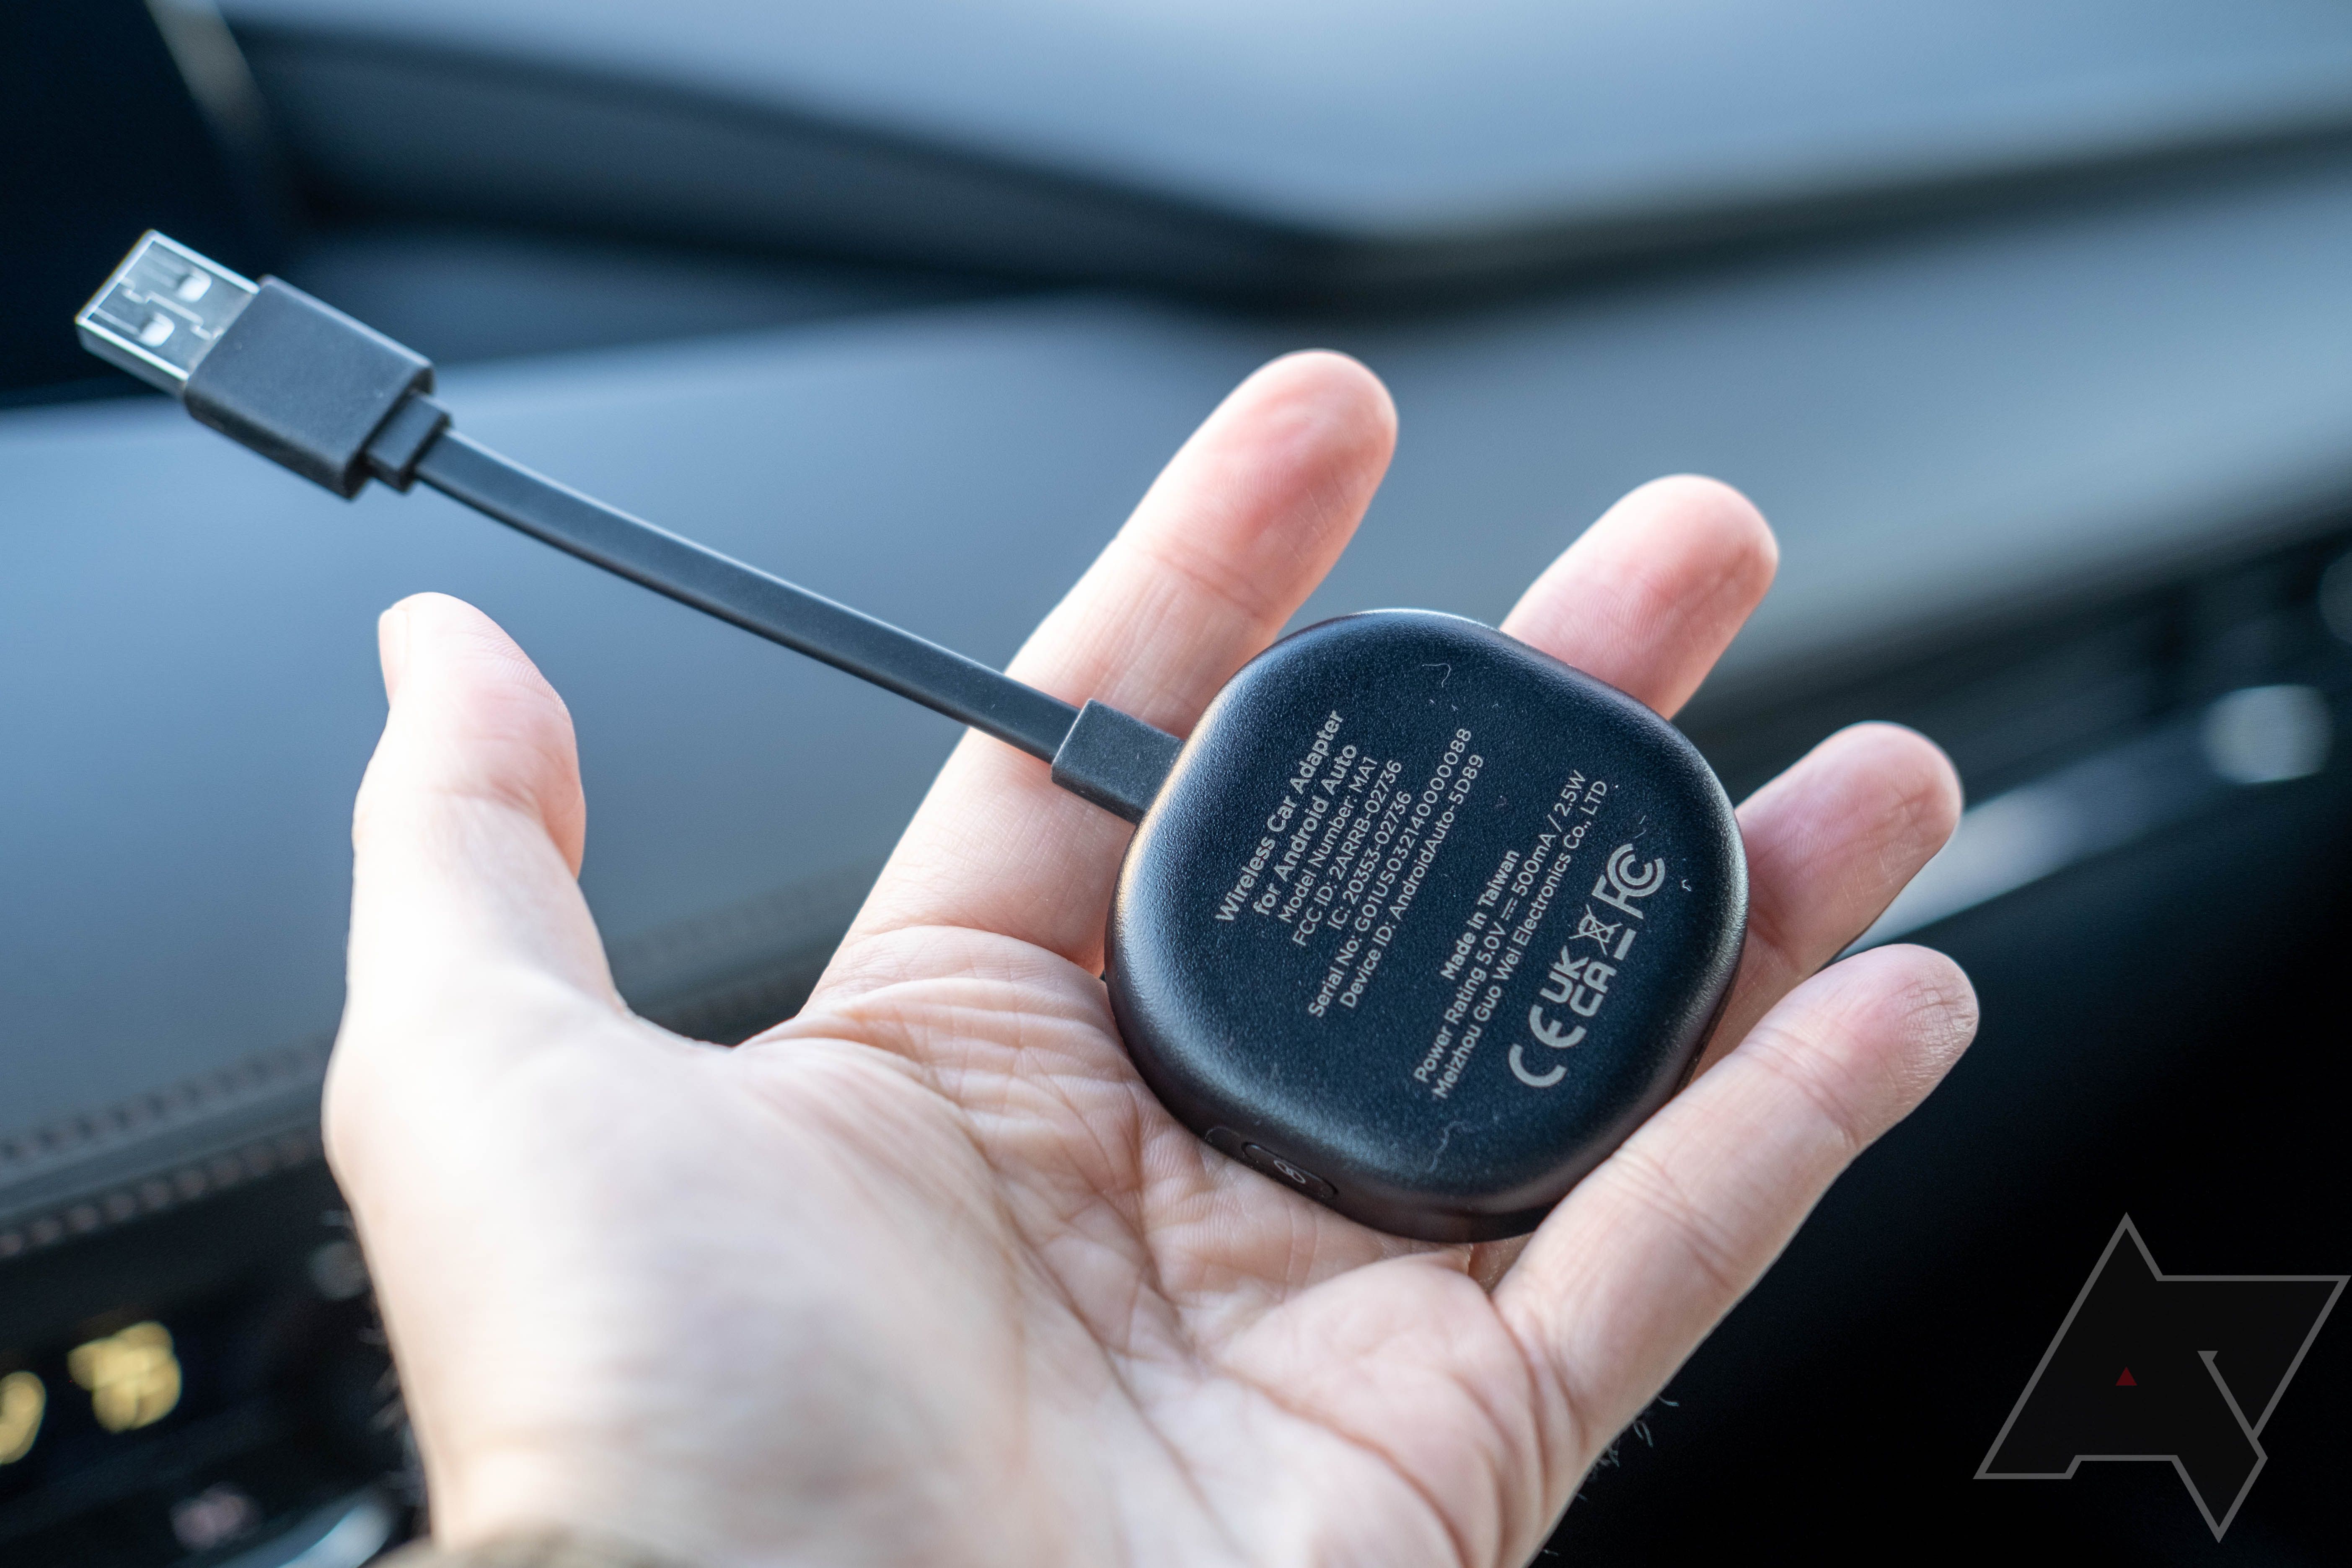 The World's Top Android Auto Wireless Adapter Is Now Cheaper